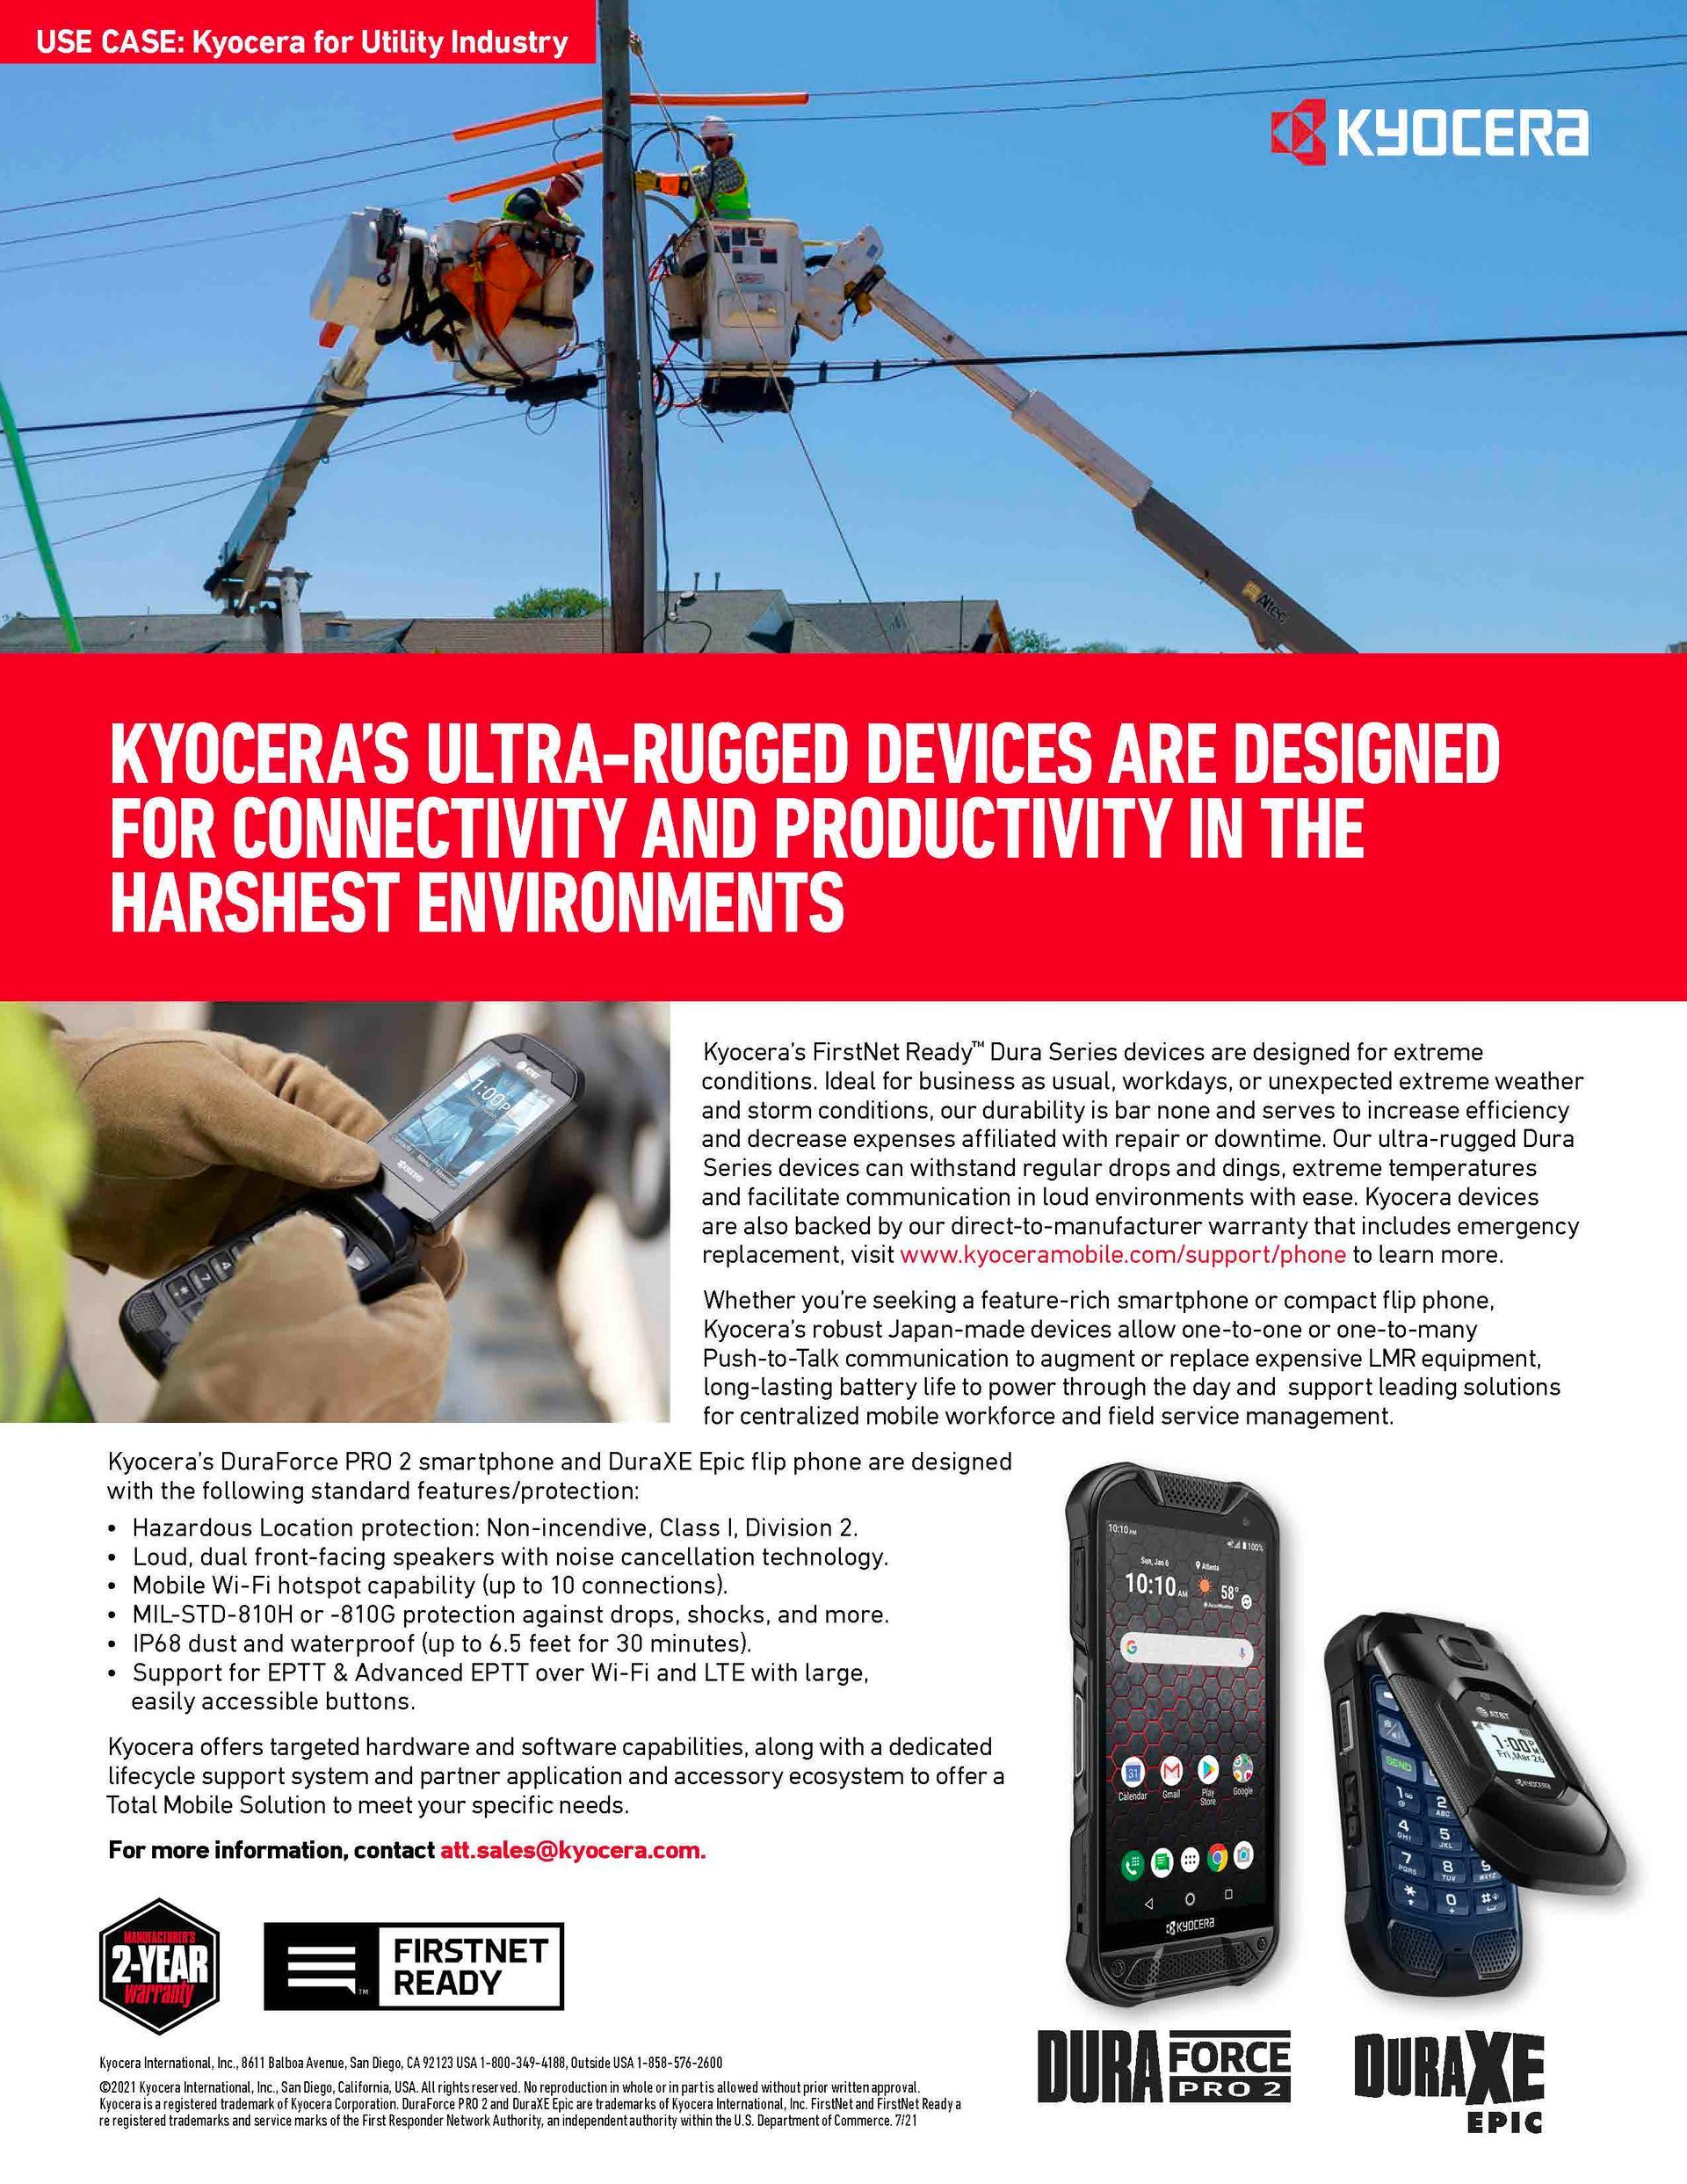 Kyocera 's ultra-rugged devices are designed for connectivity and productivity in the harshest environments.